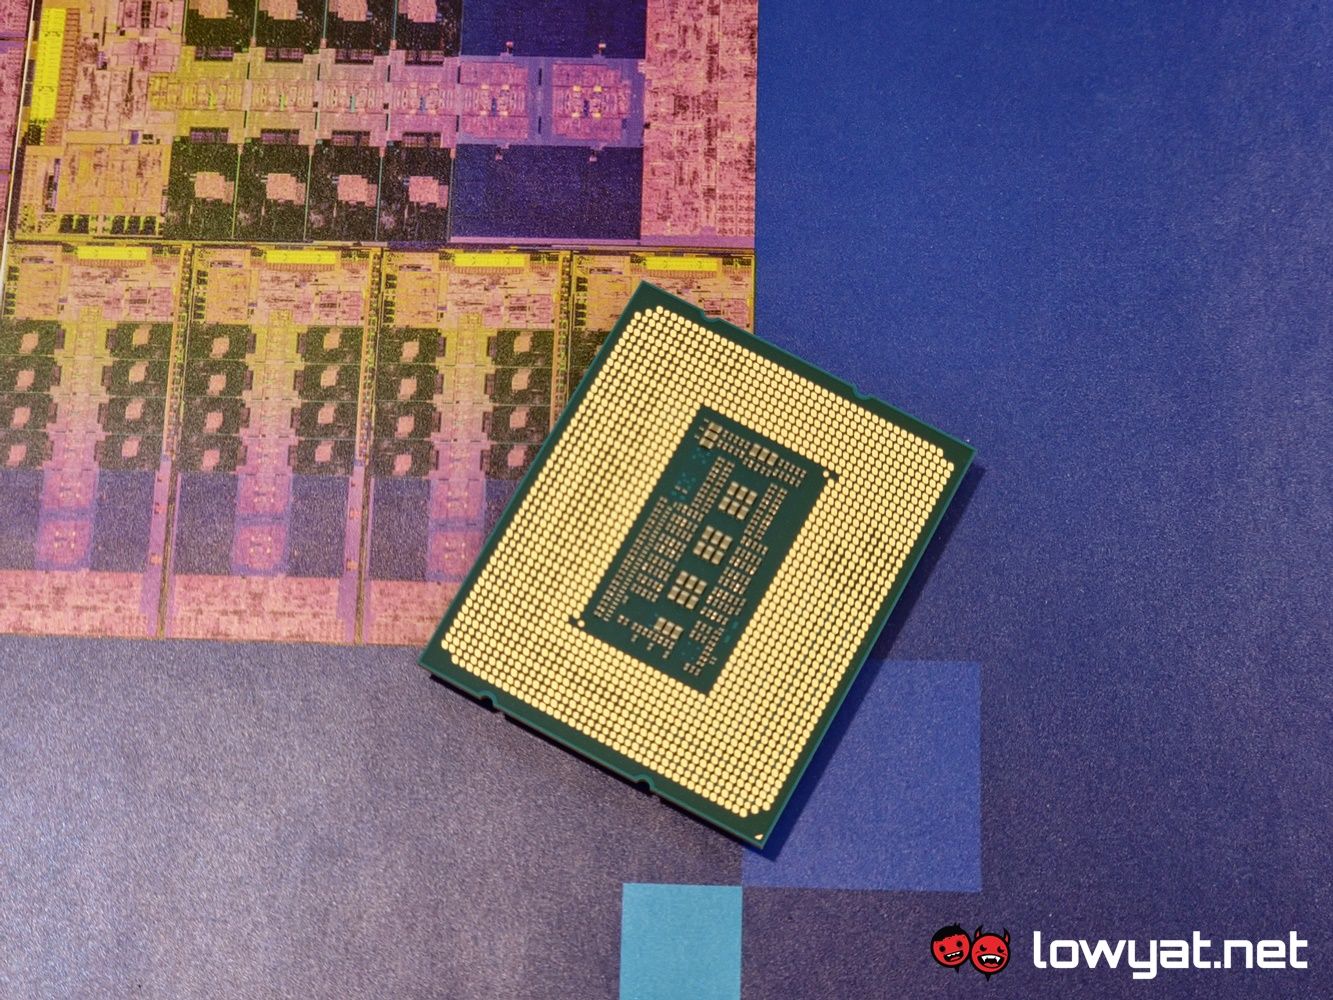 Intel Core I9-14900K Review: 6GHz Come To The Mainstream 